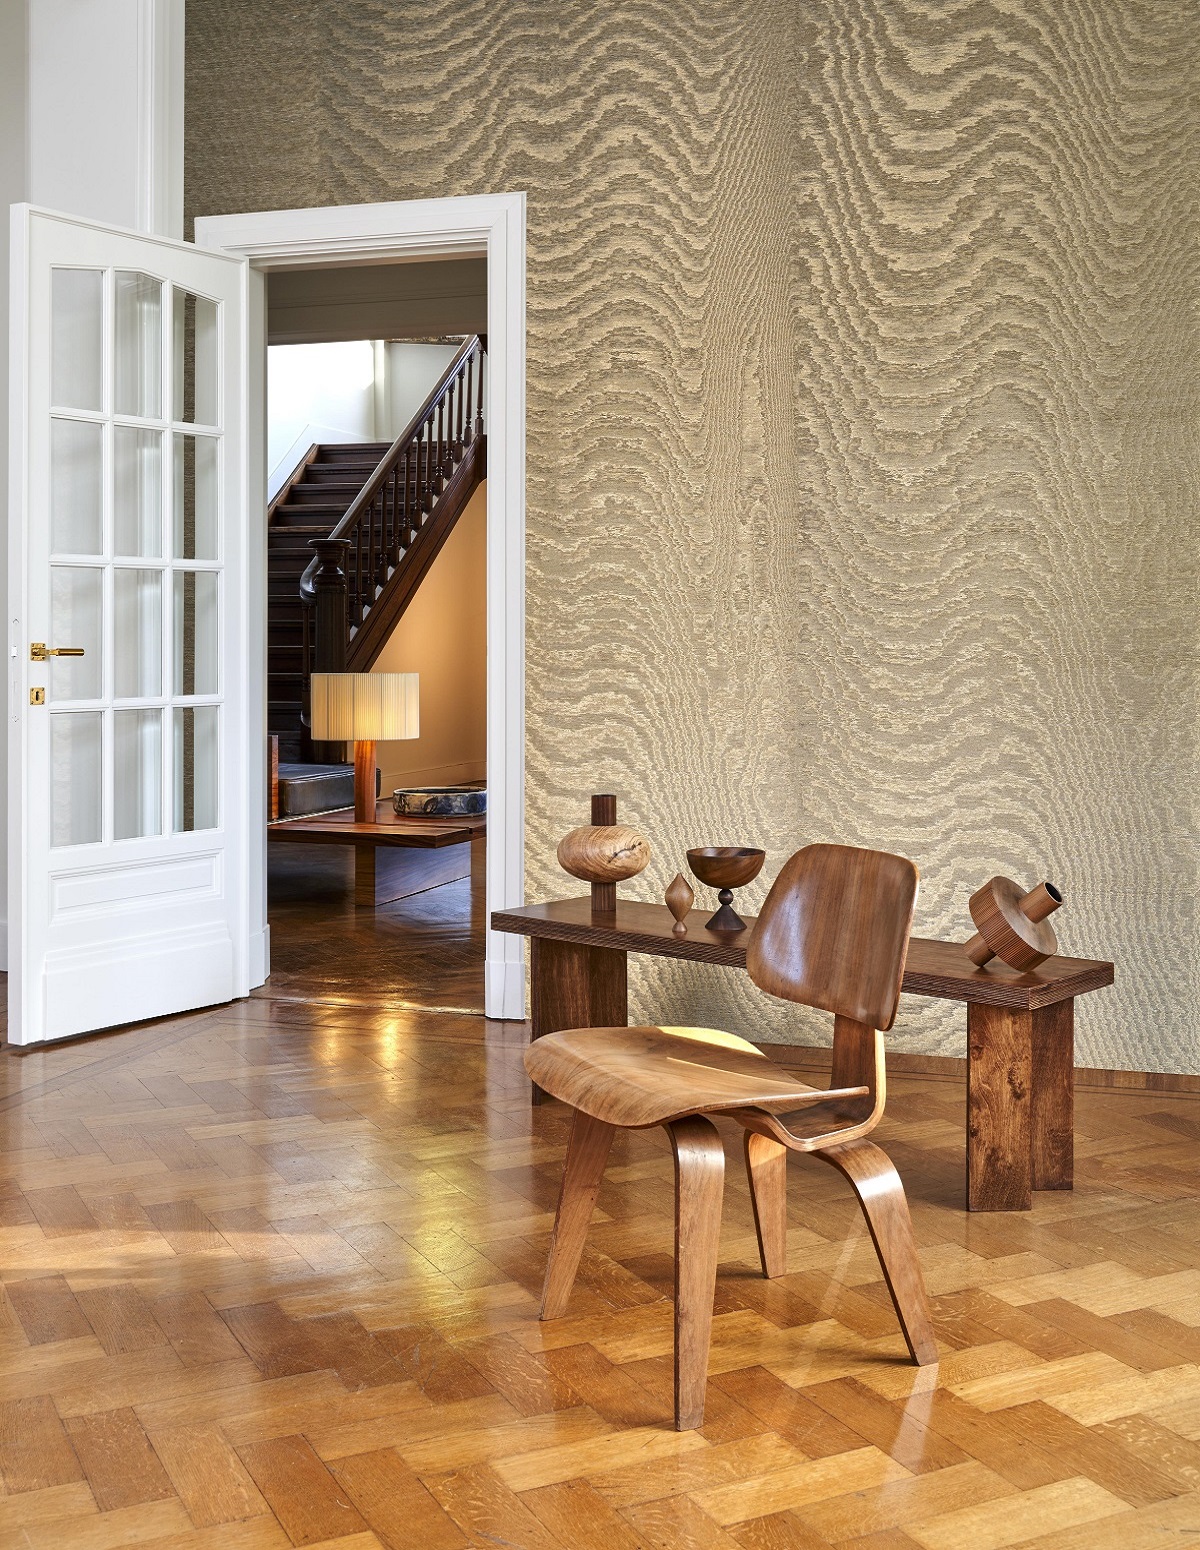 wooden parquet flooring in a period house with modern wooden chair and moire wallcovering